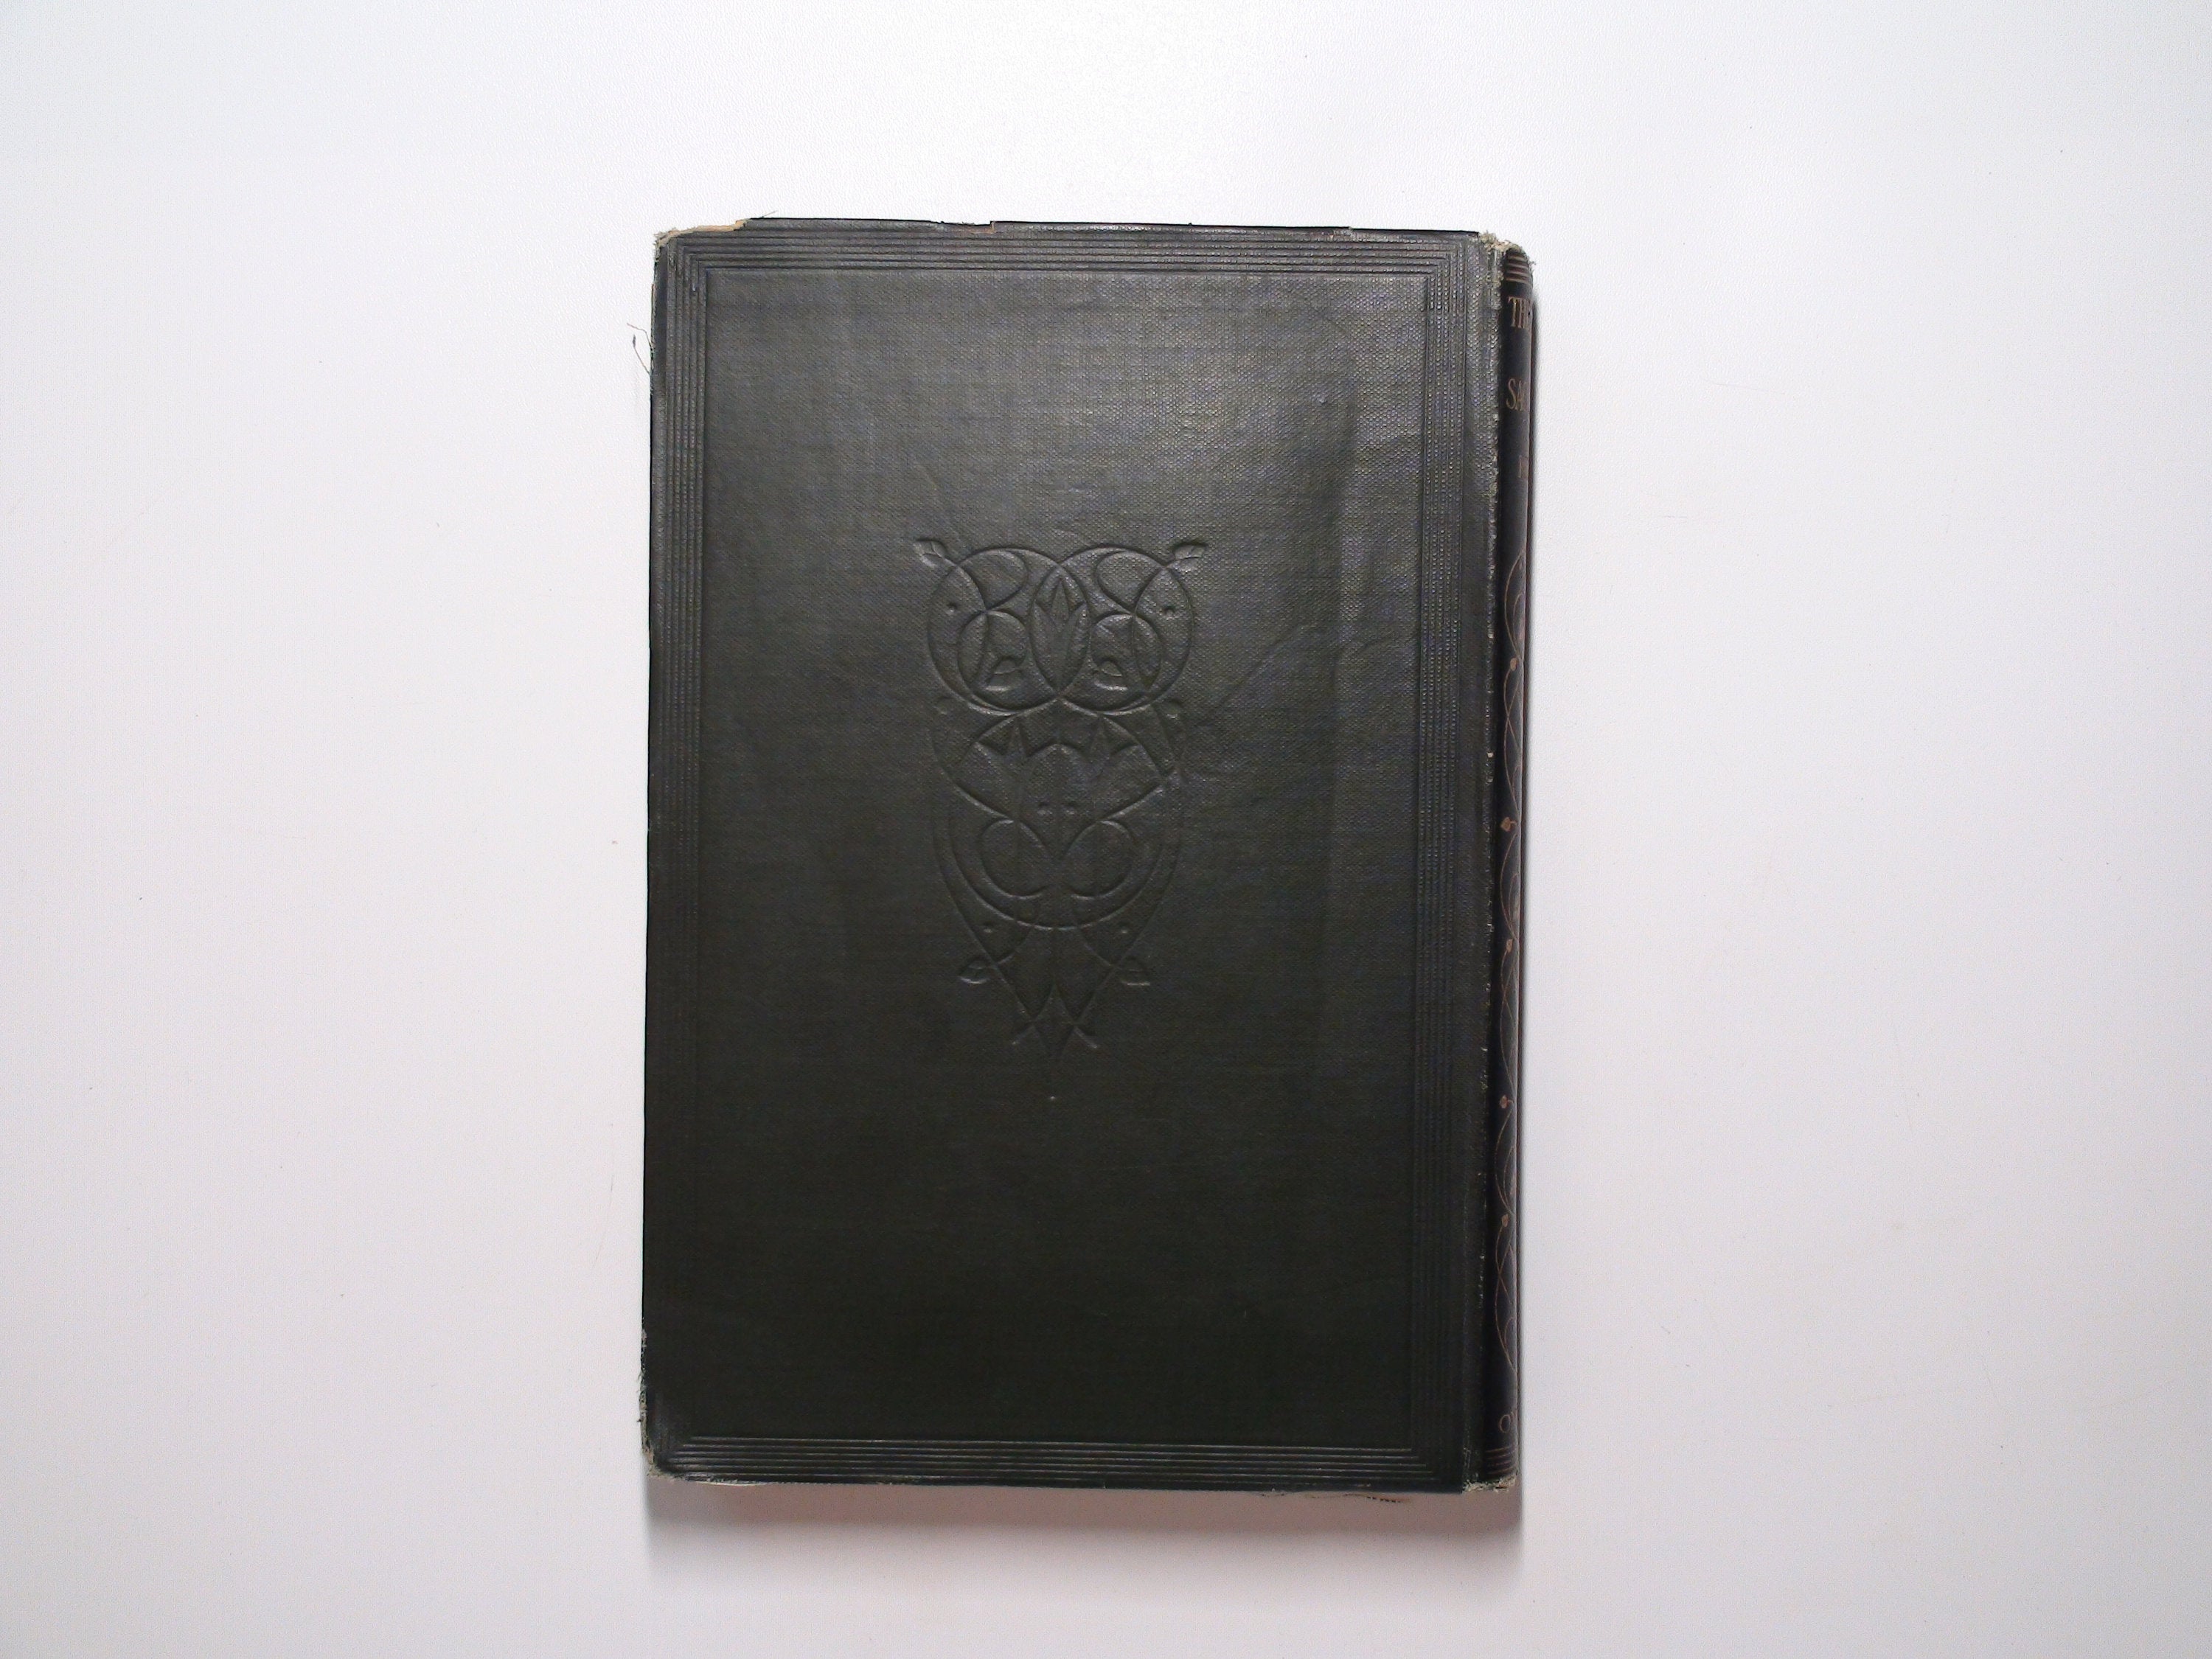 The Treasury Of Sacred Song, By Francis T. Palgrave, Leather, 1906